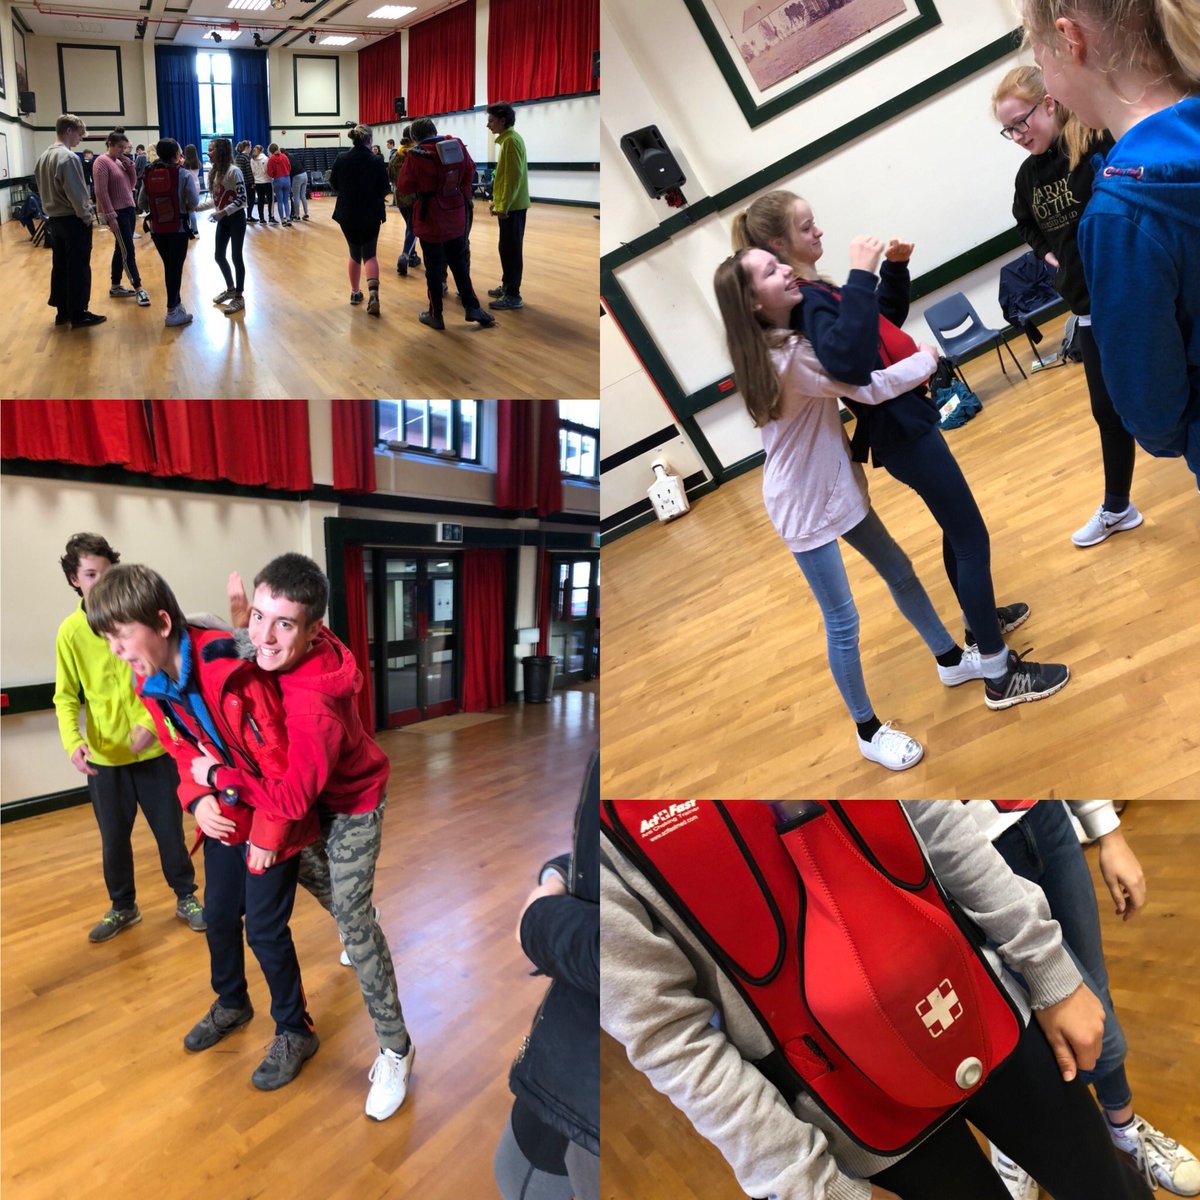 @DofEDorset @Gill_School @Shaftesbury_sch #dofe #firstaid @LifelineTrg 6hr emergency first aid course for half of @dofegilloac new participants. Choking casualty!